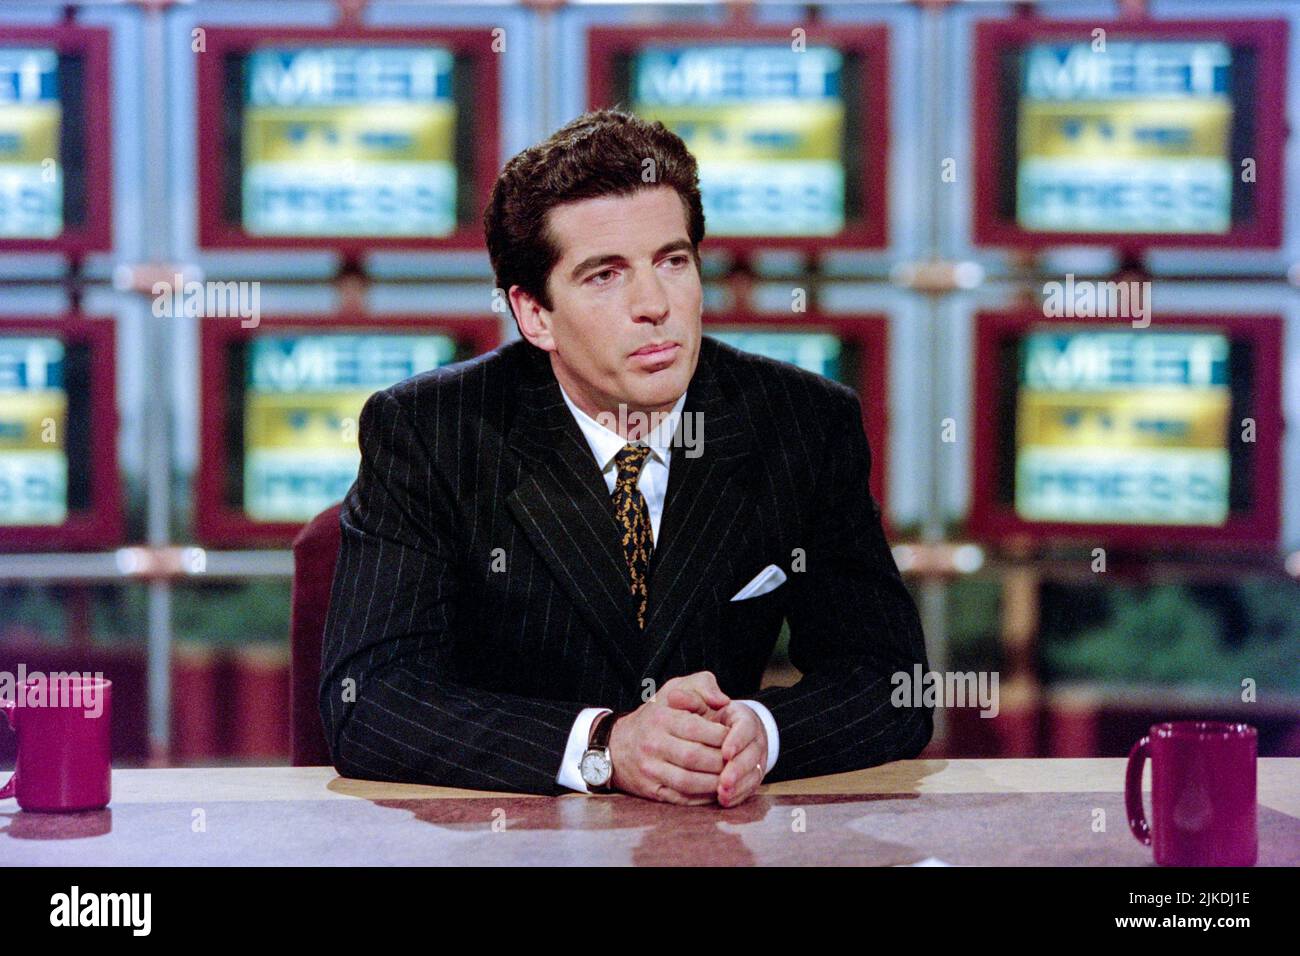 John F. Kennedy Jr, son of the late US president, discusses his political journal 'George' during NBC's Meet the Press interview program, February 16, 1997 in Washington, DC. Stock Photo